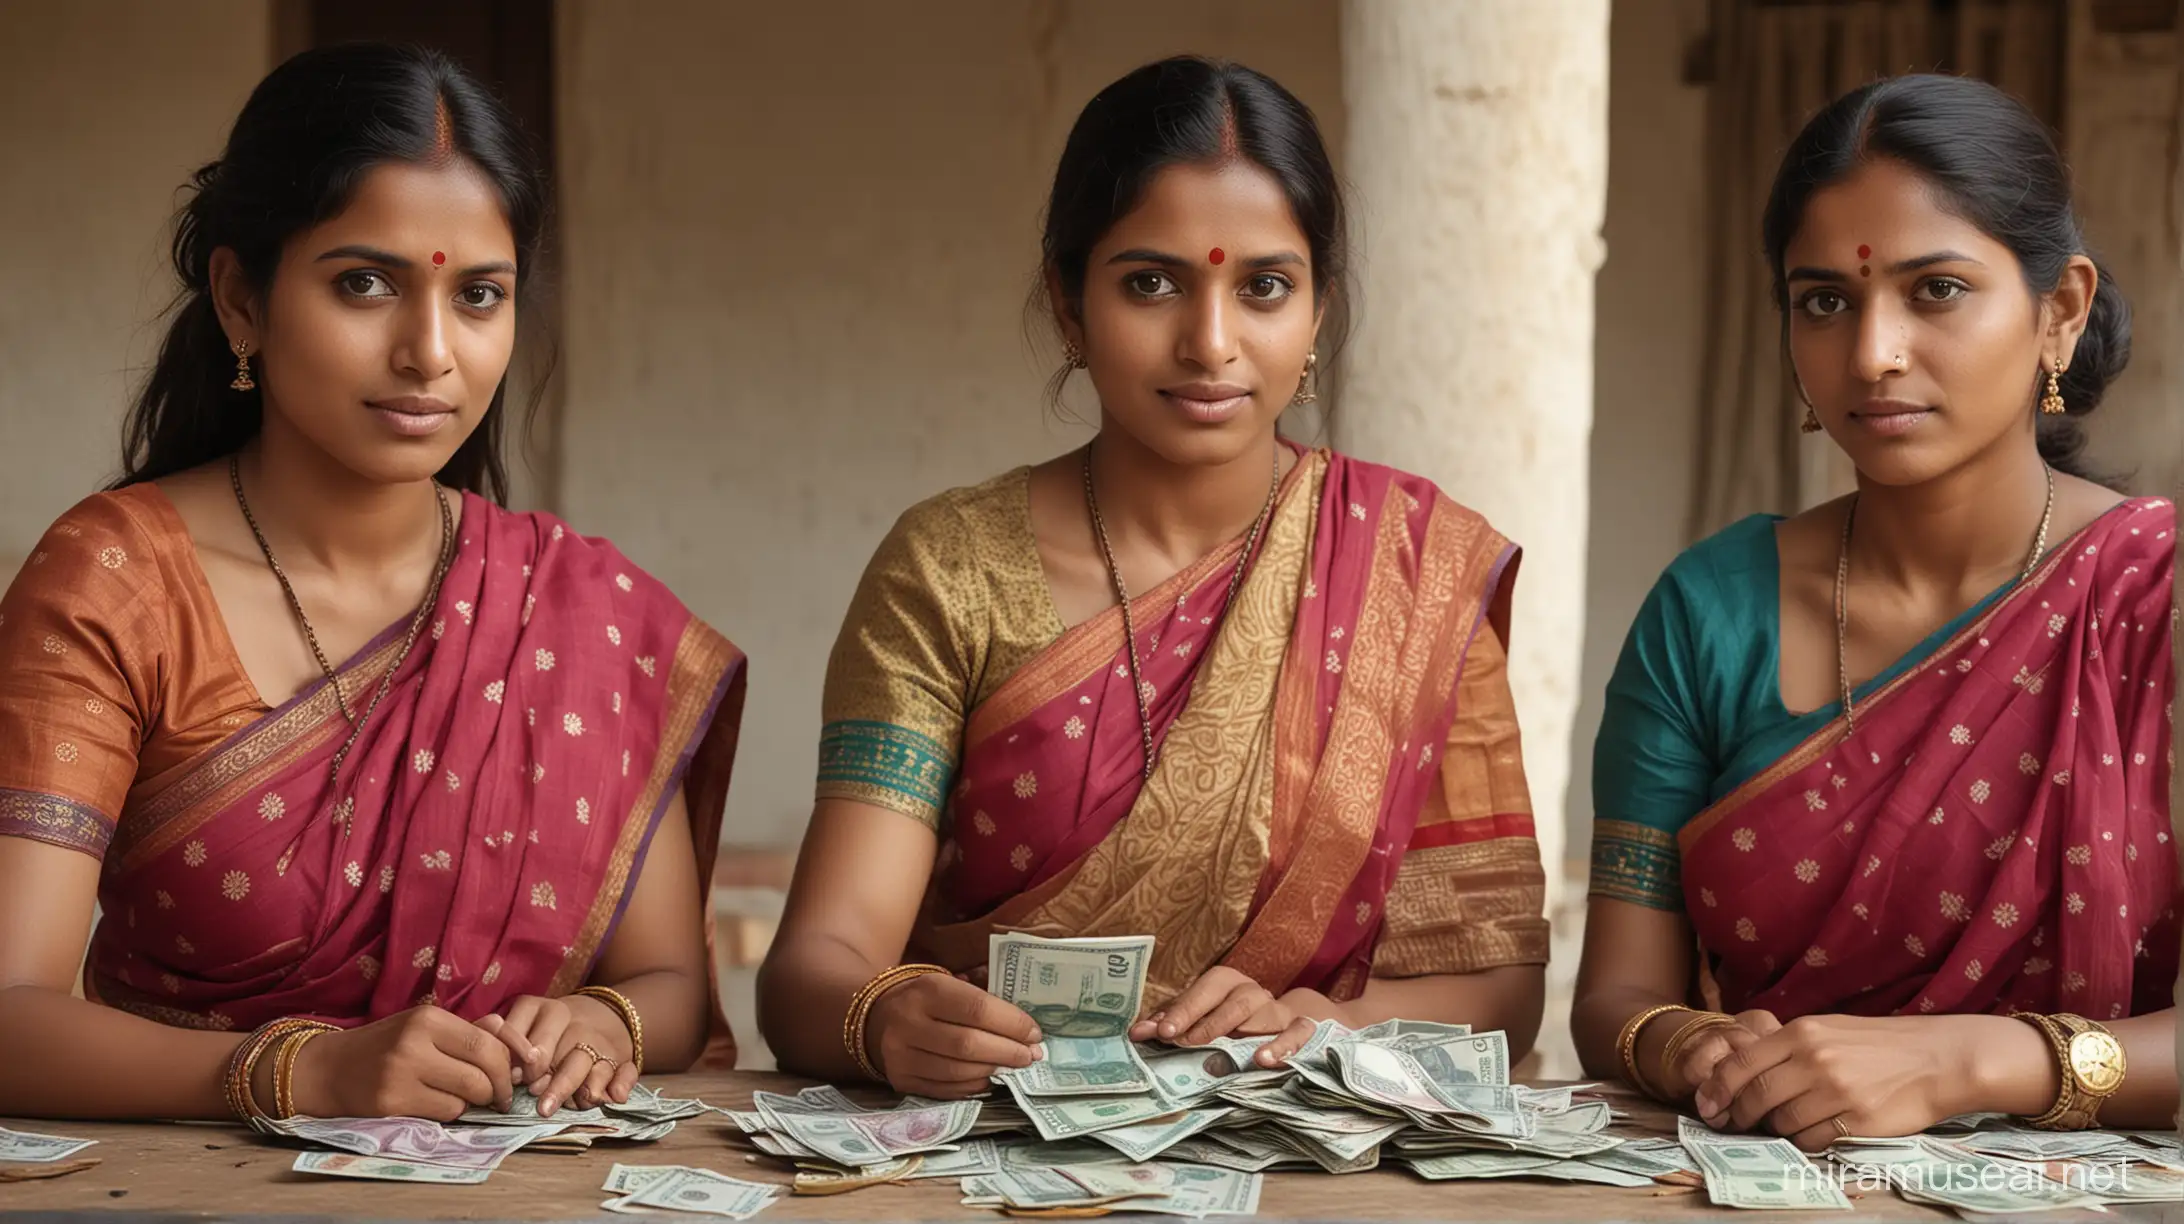 Indian Village Women in Saree Counting Money at Home